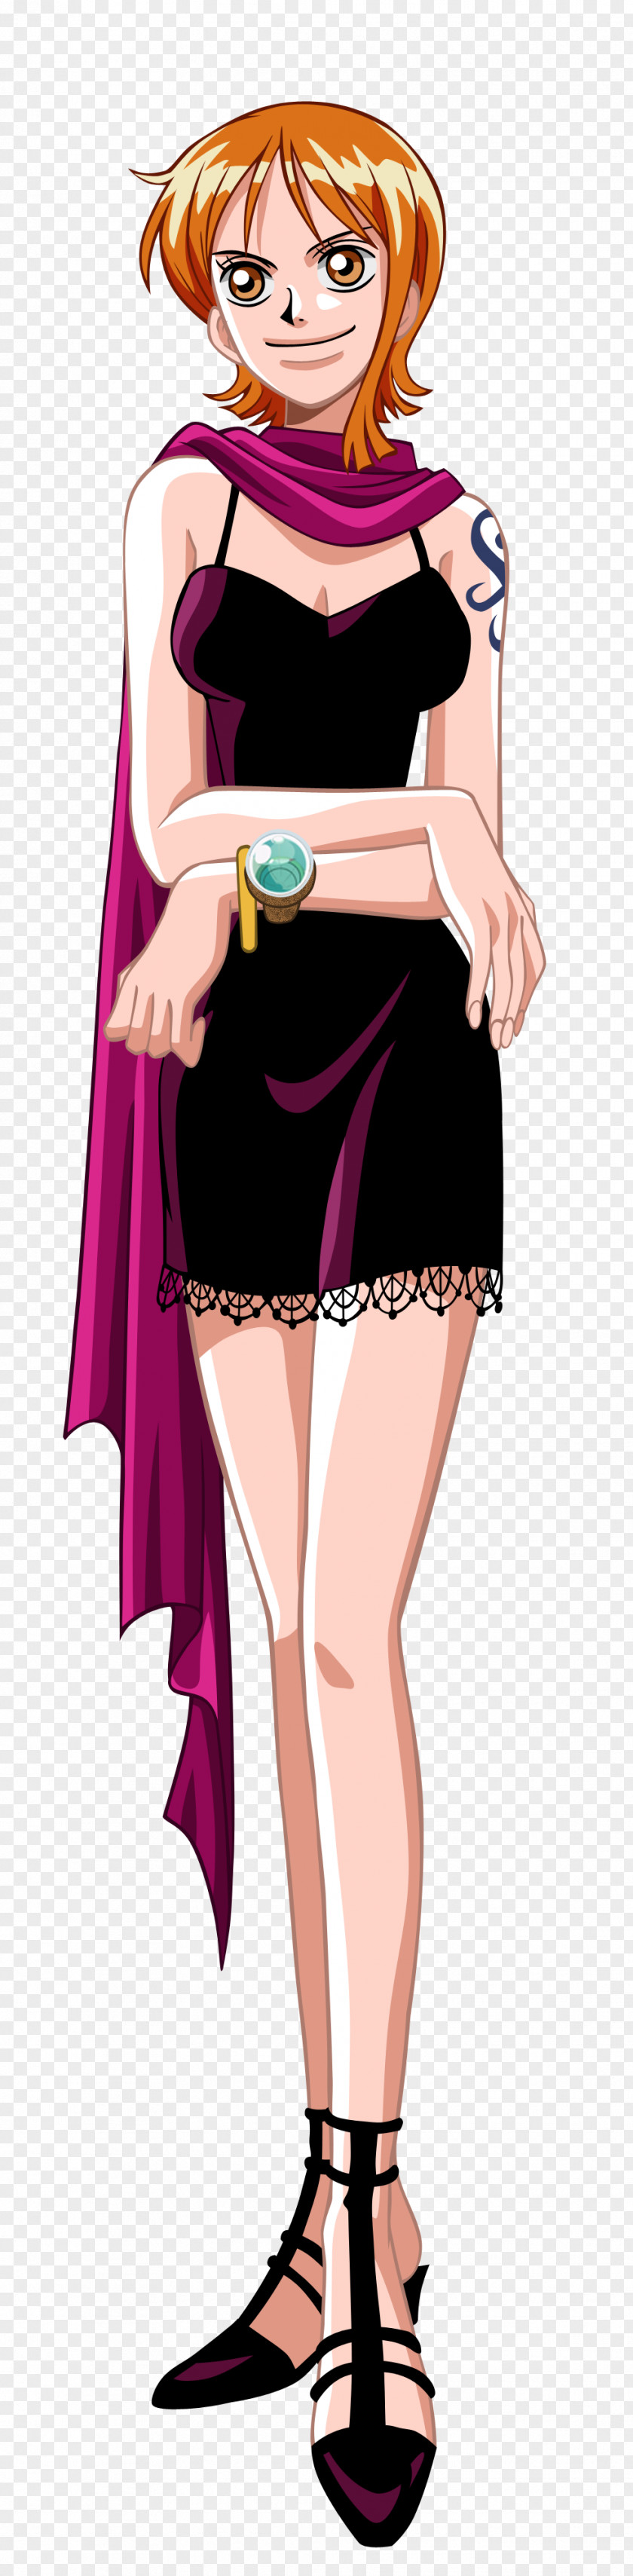 One Piece Nami Monkey D. Luffy Nico Robin Character PNG